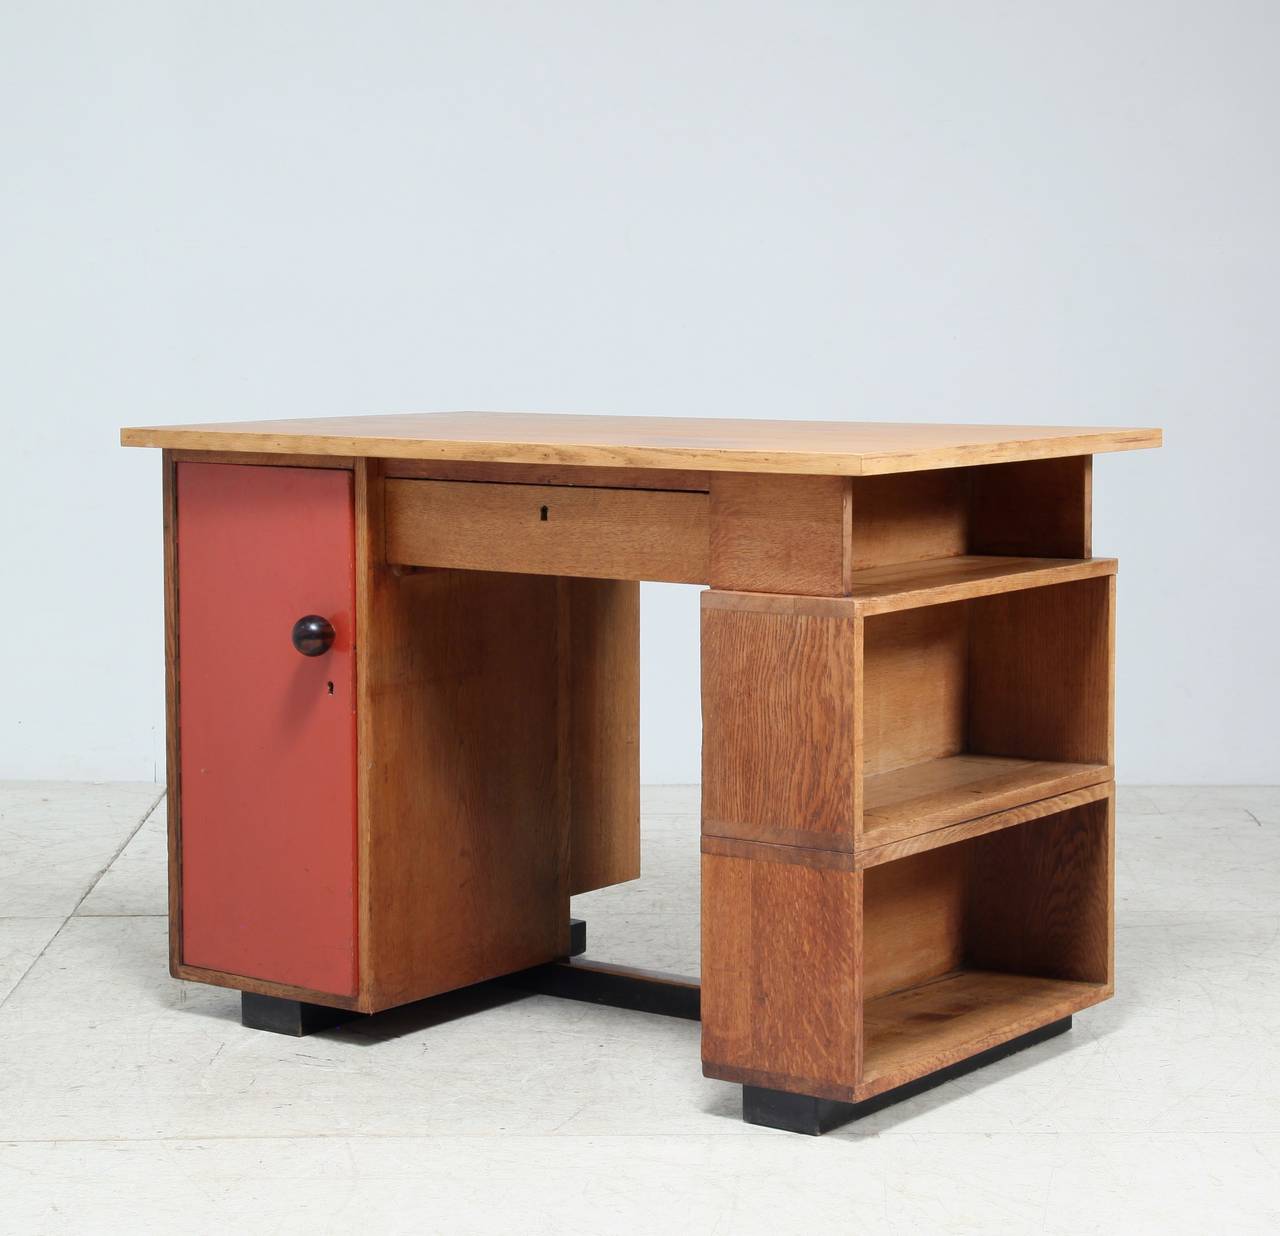 Rare and sober desk by J.A. Muntendam. This desk was especially made for a school in Utrecht (Holland). The desk originates from one of the former teachers of the school, who used it at home after the desk and accompanying bookcase became obsolete